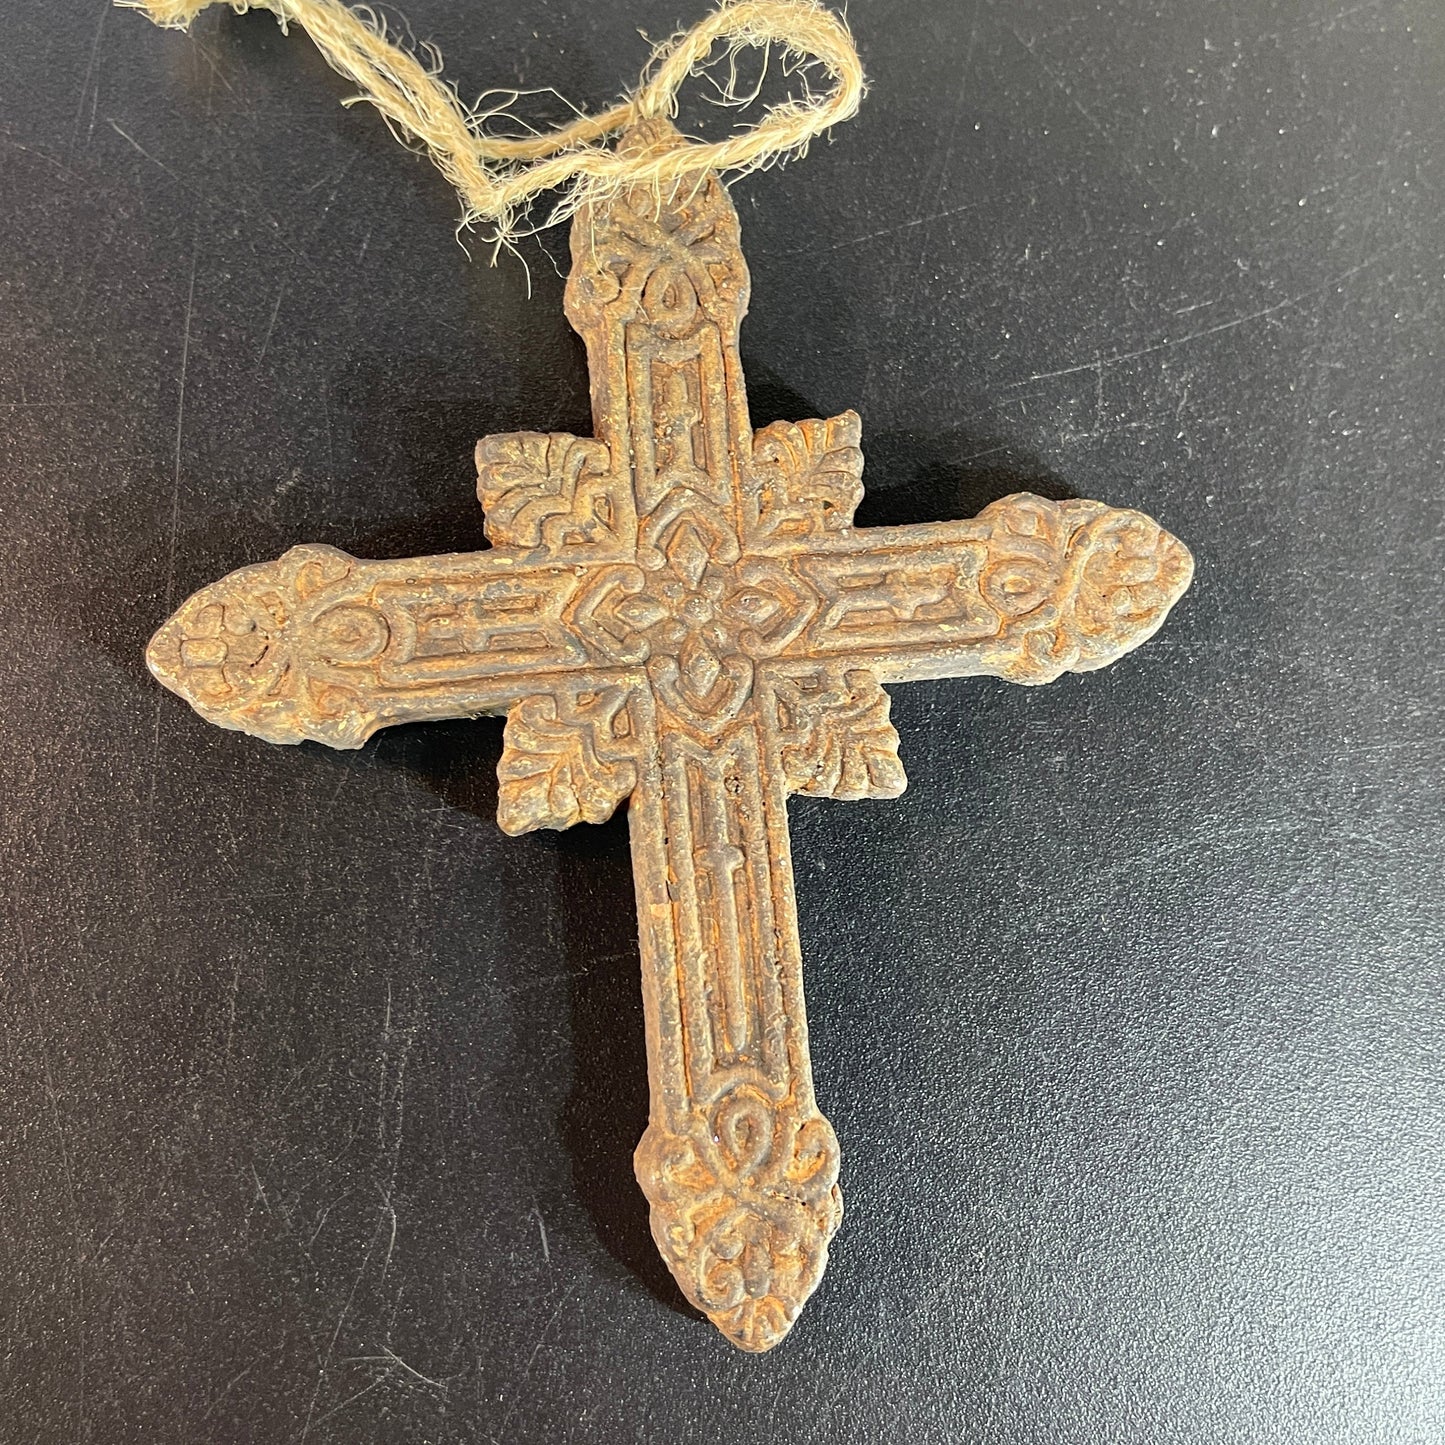 Intricately detailed carved wooden Holy Cross ornament